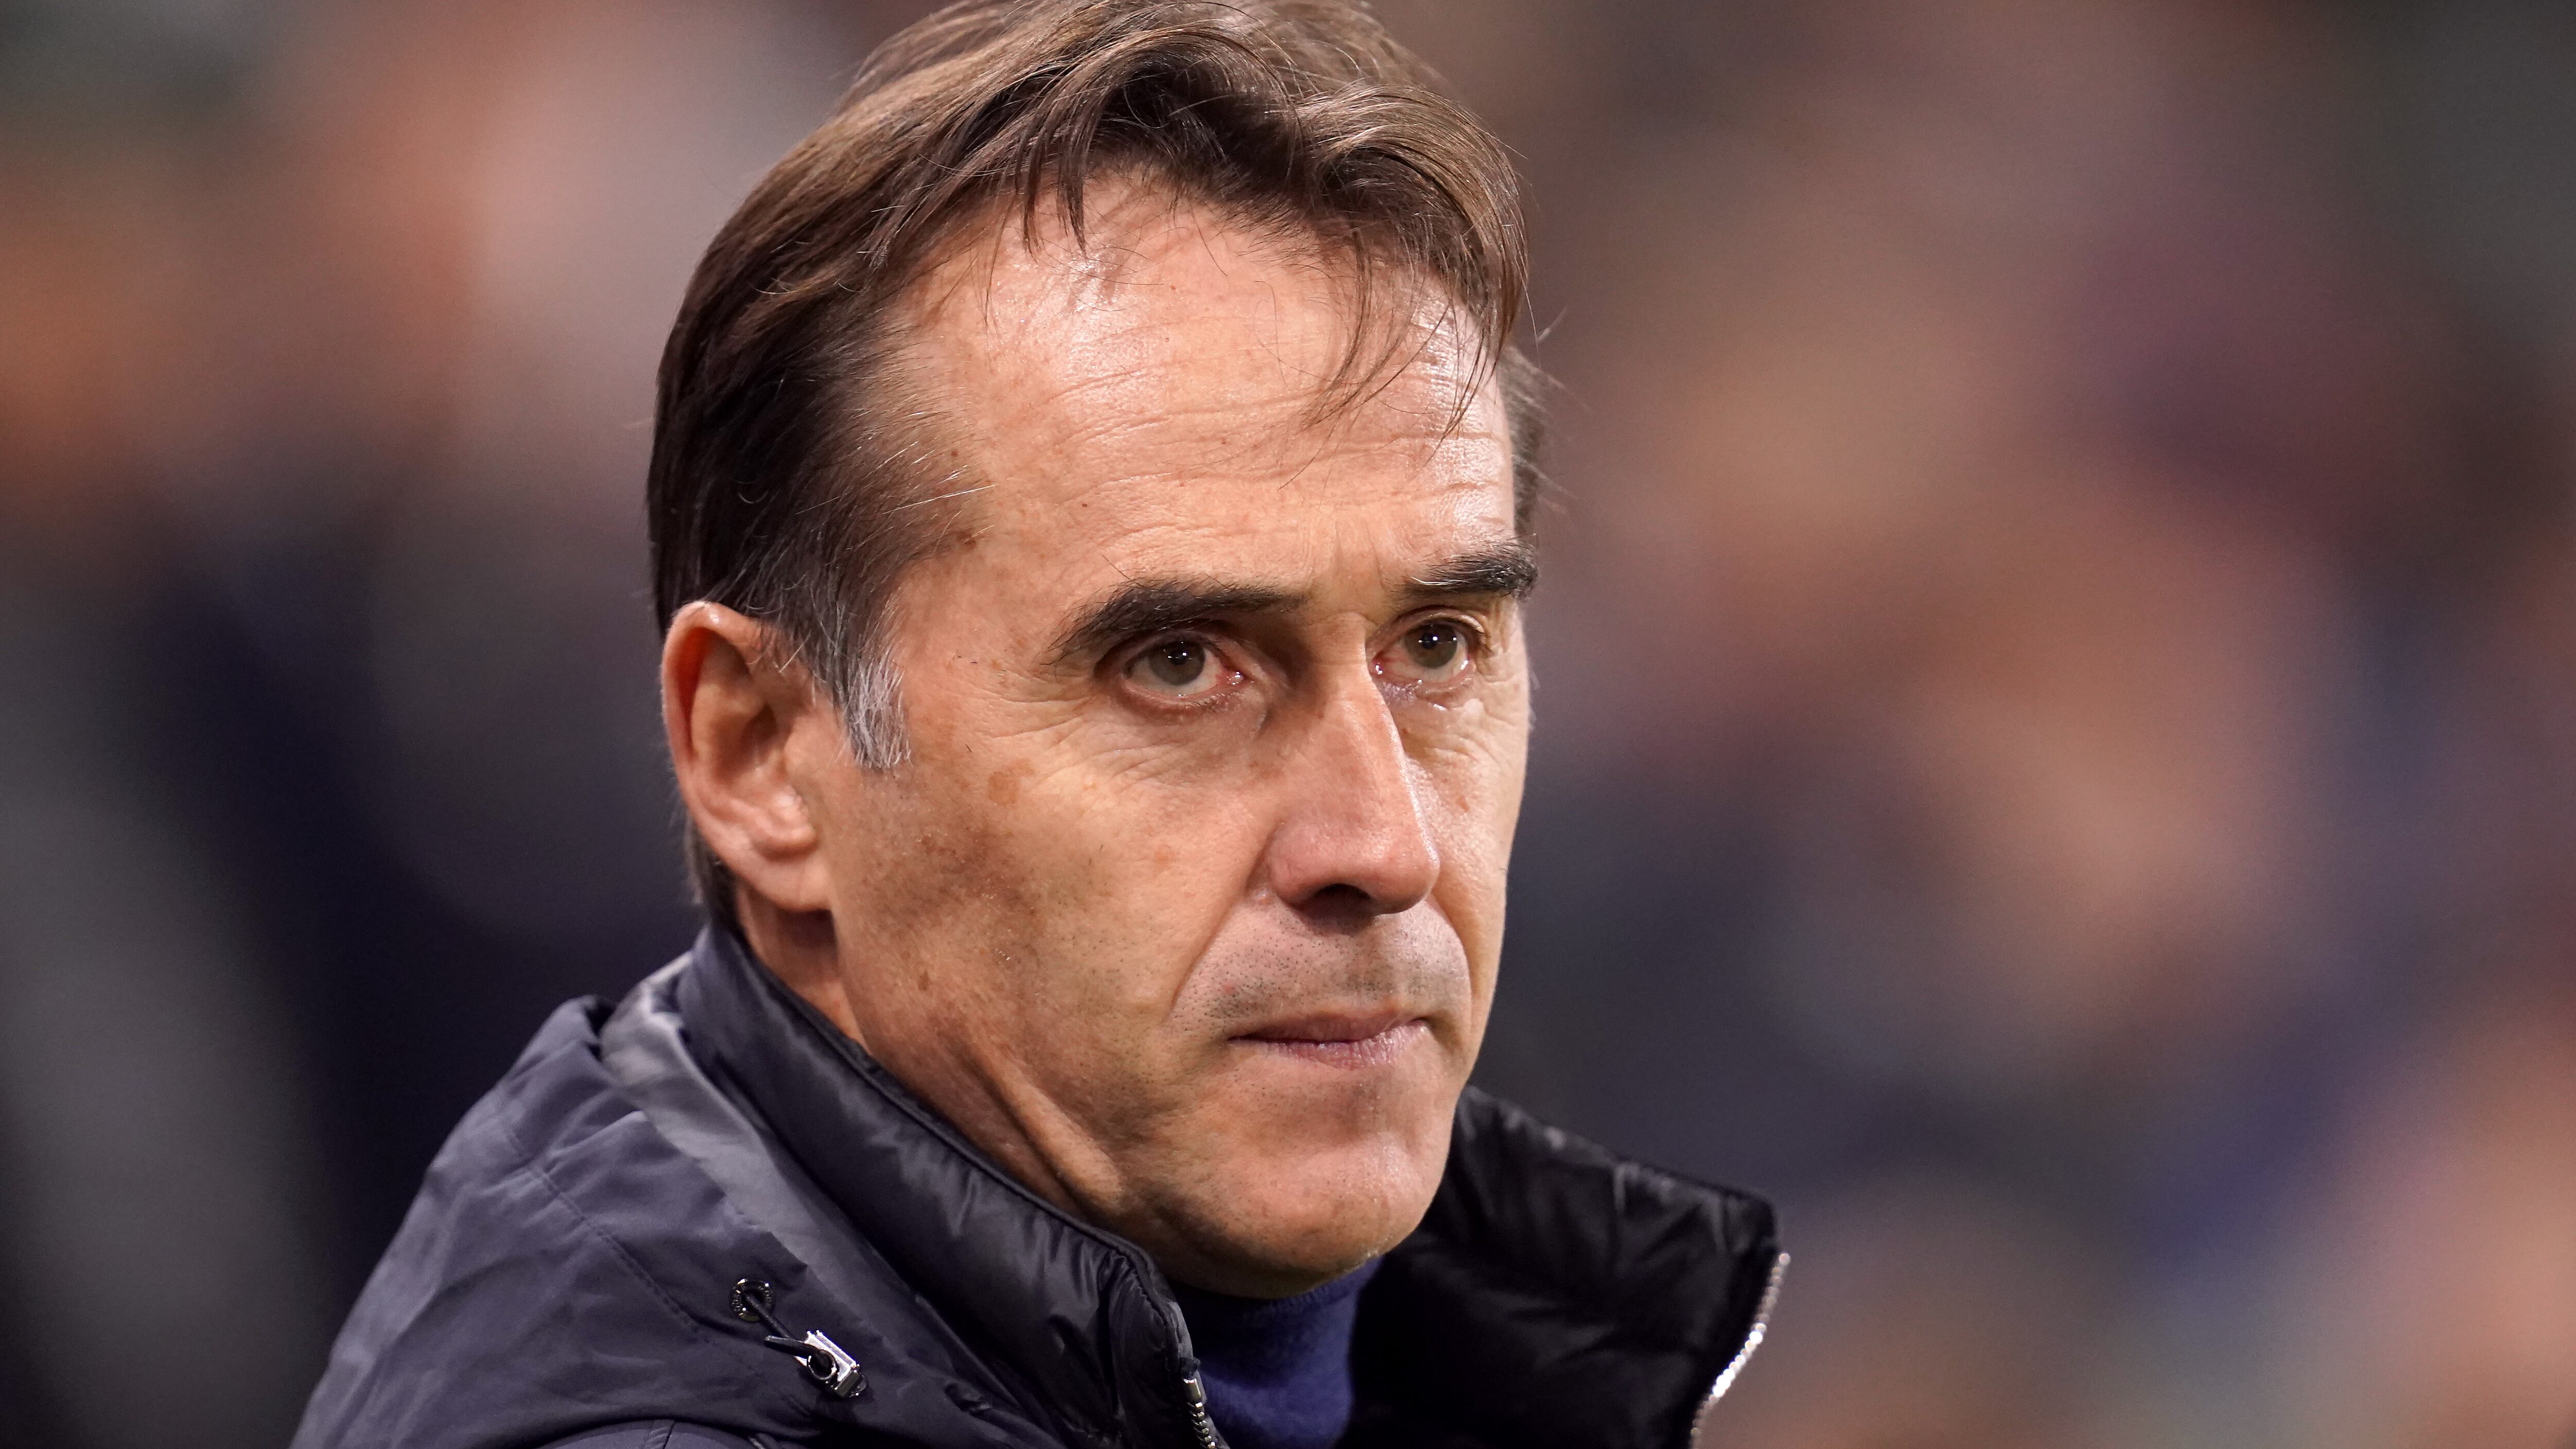 West Ham have announced Julen Lopetegui as their new manager